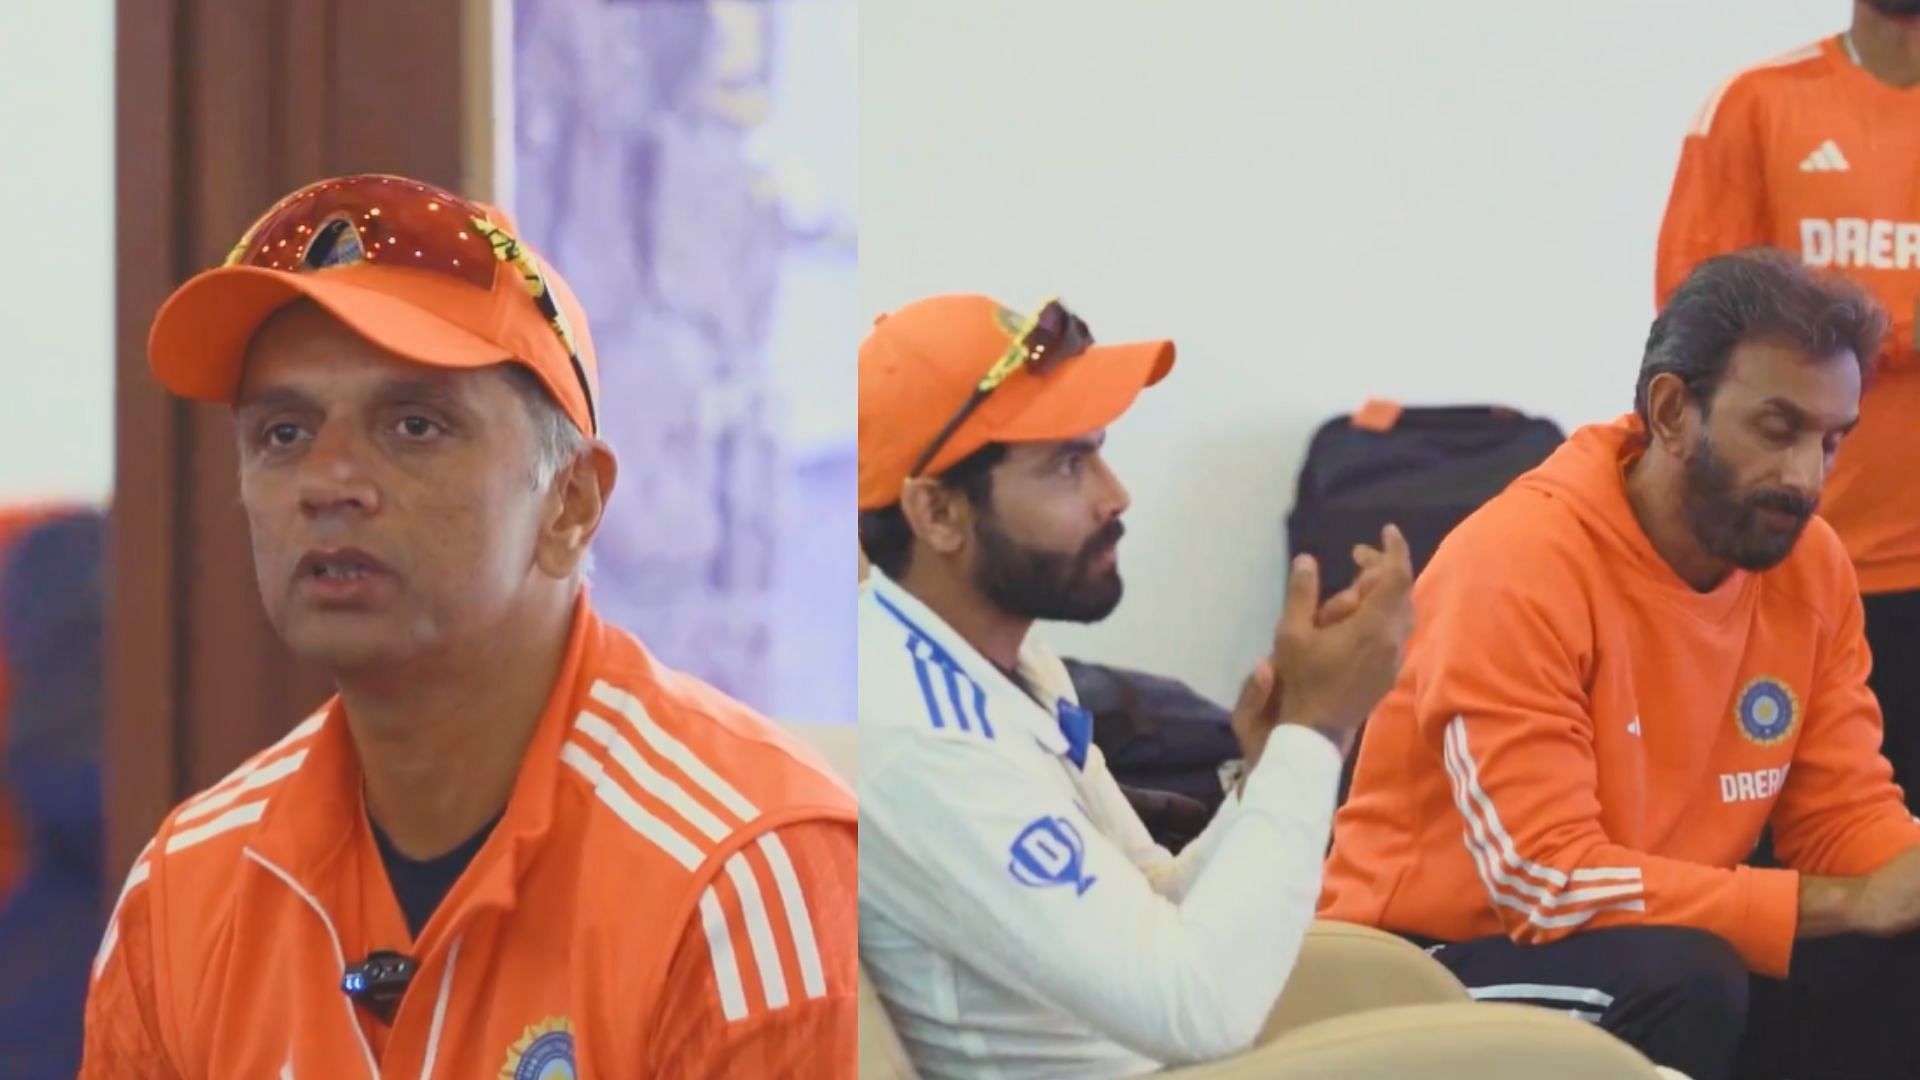 Snippets from Rahul Dravid speaking to the Indian players and the coaching staff after Dharamsala win